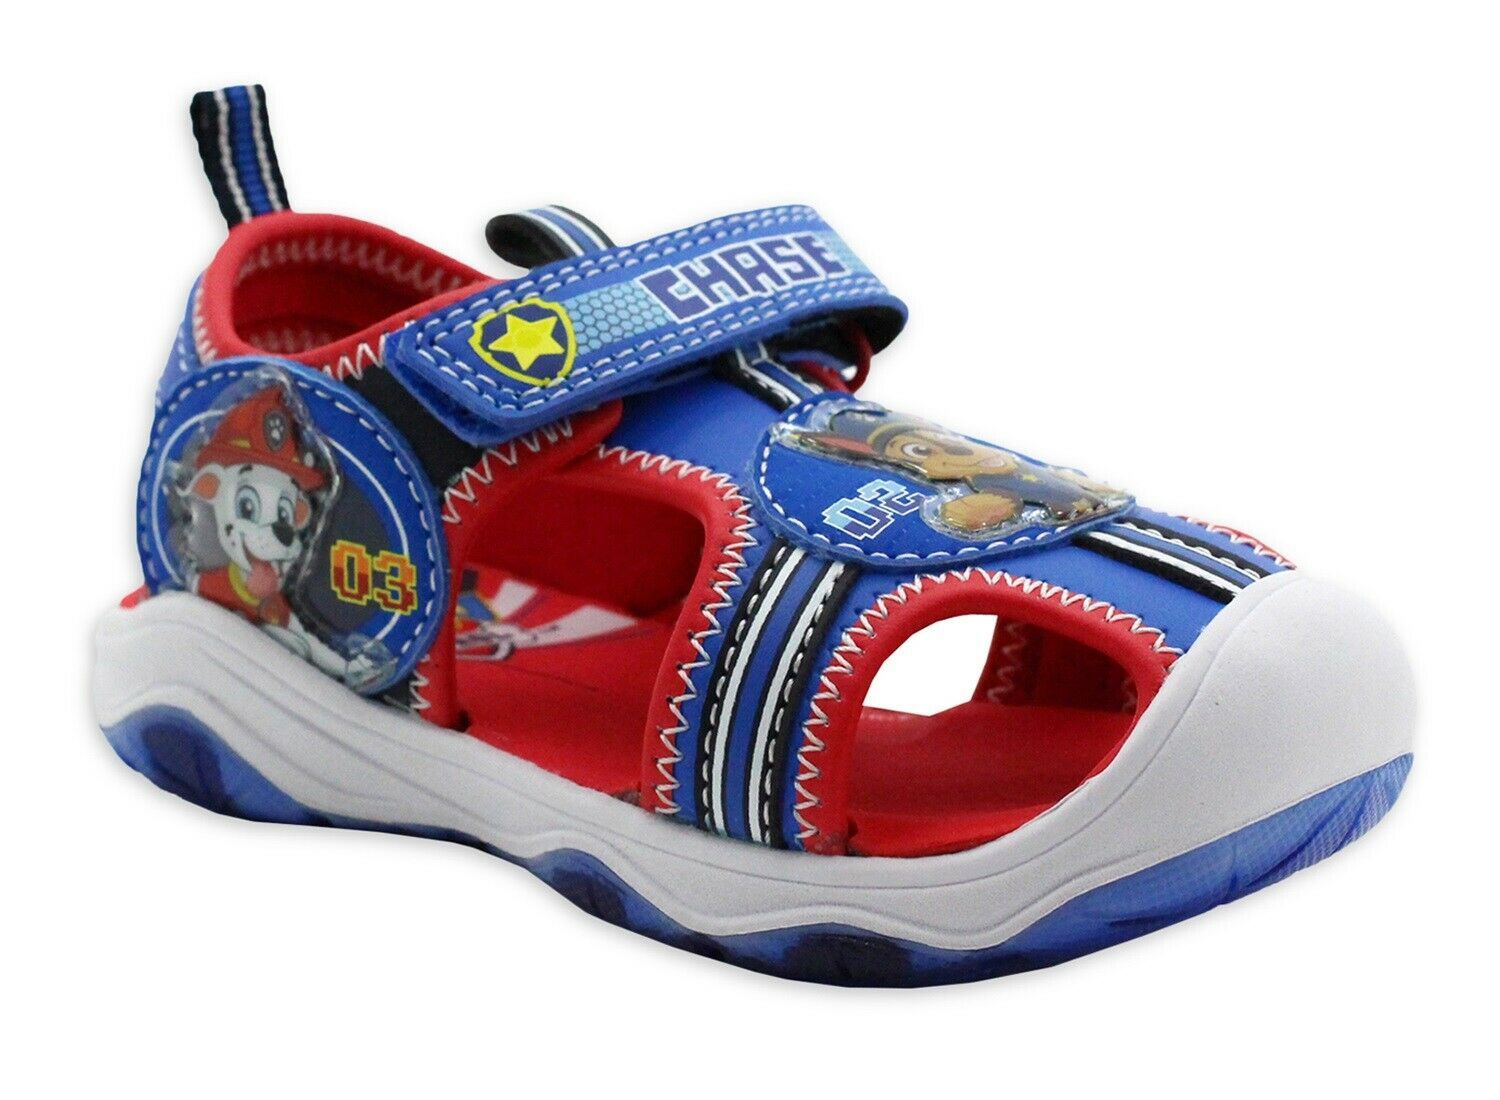 Primary image for Paw Patrol Sandals Toddler Size 7 8 9 10 or 11 Light Up Chase Marshall Closed